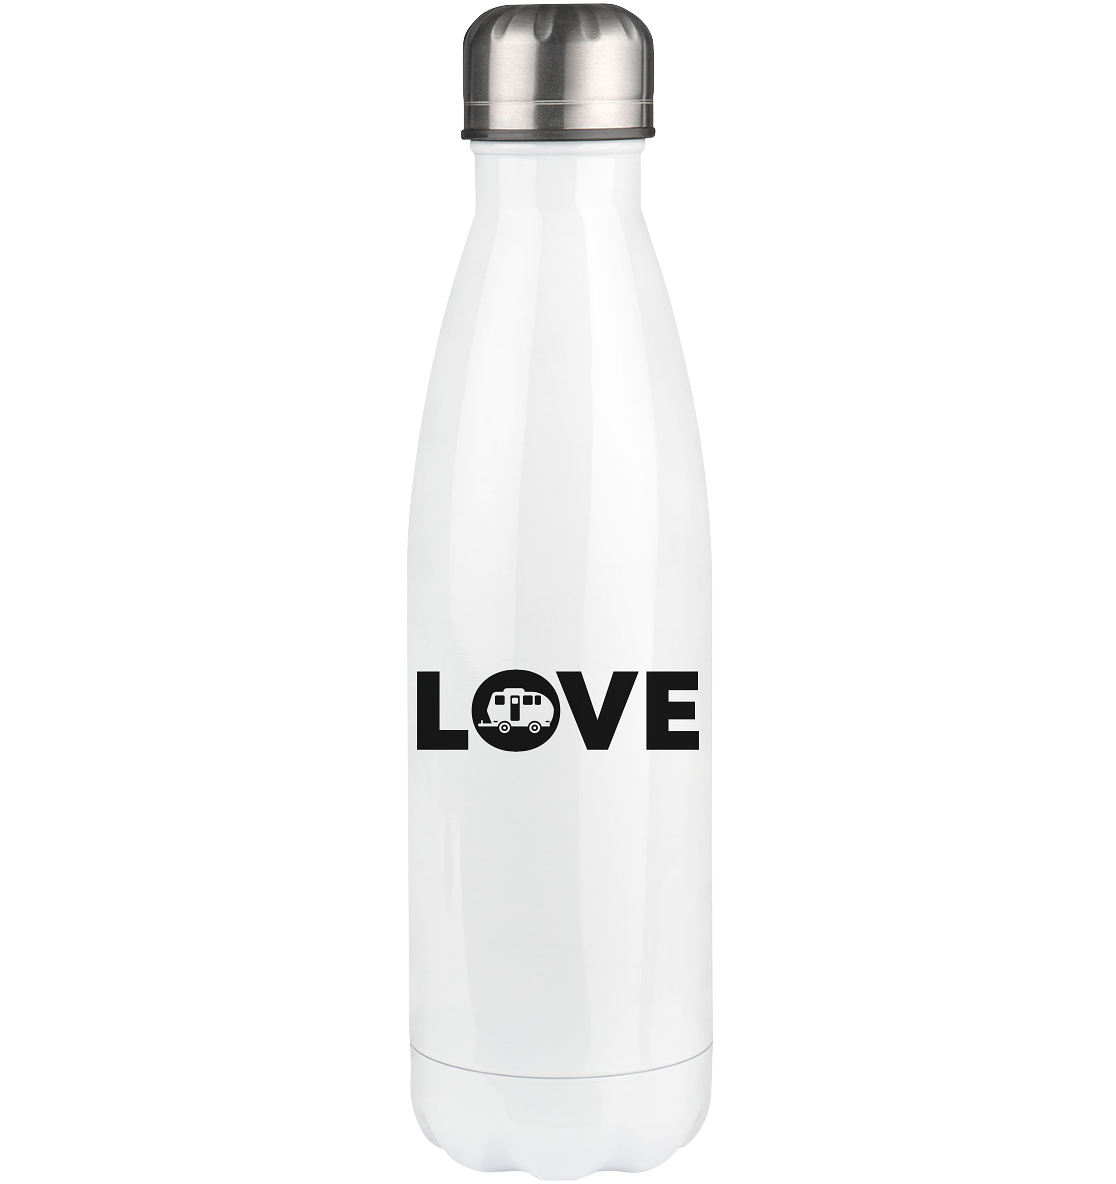 Love 2 - Edelstahl Thermosflasche camping UONP 500ml